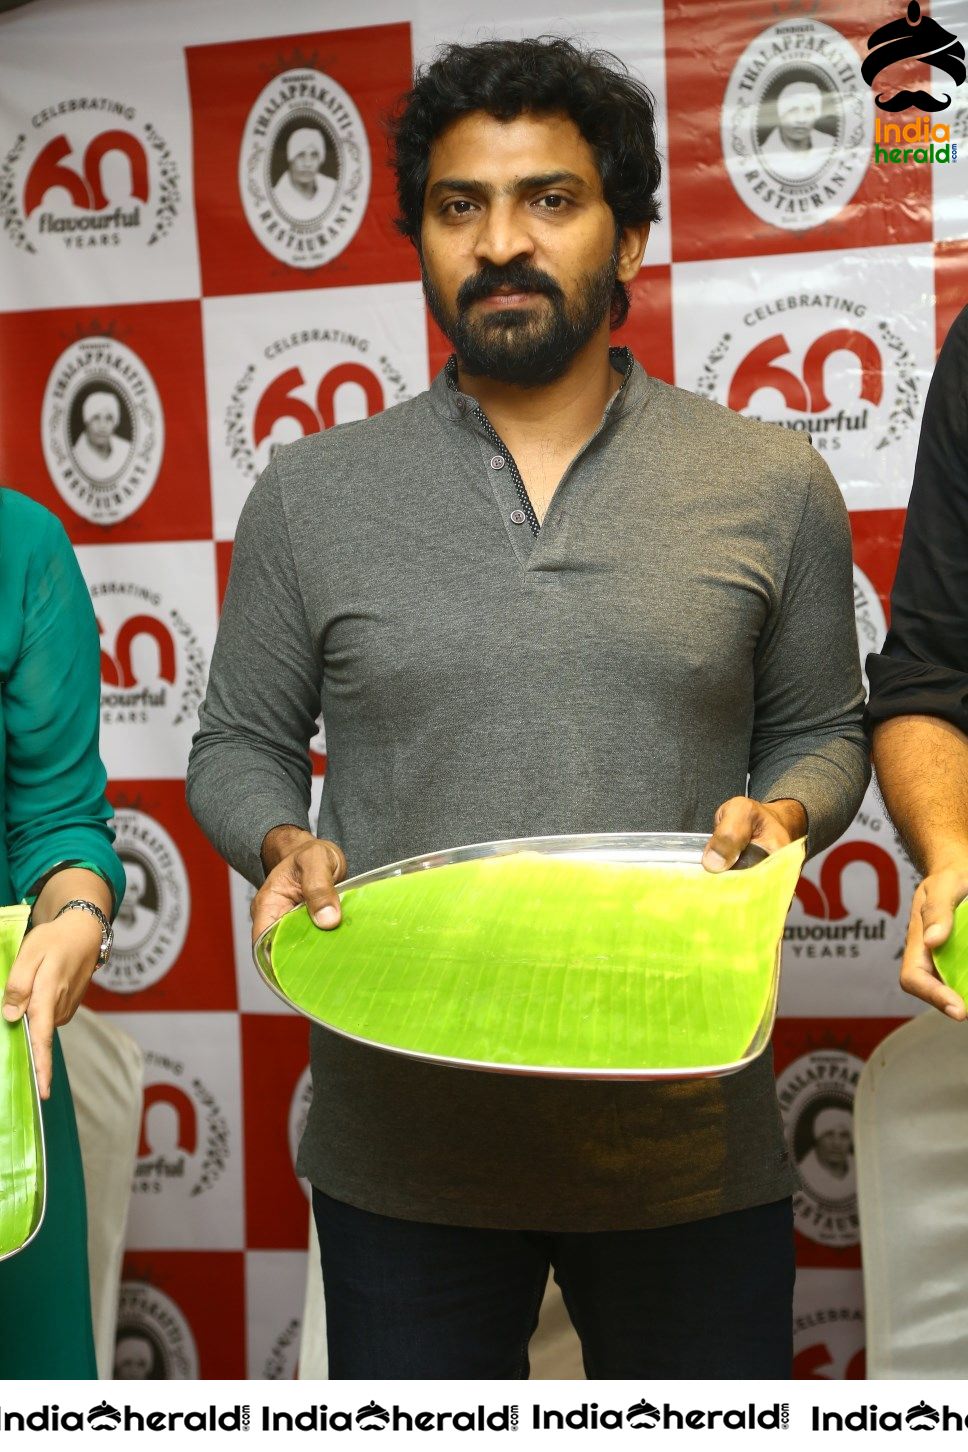 Actor Vaibhav Reddy Launches Dindigul Thalapakatti Clean Plate Challenge Fund Raiser support for Cancer patients Set 1